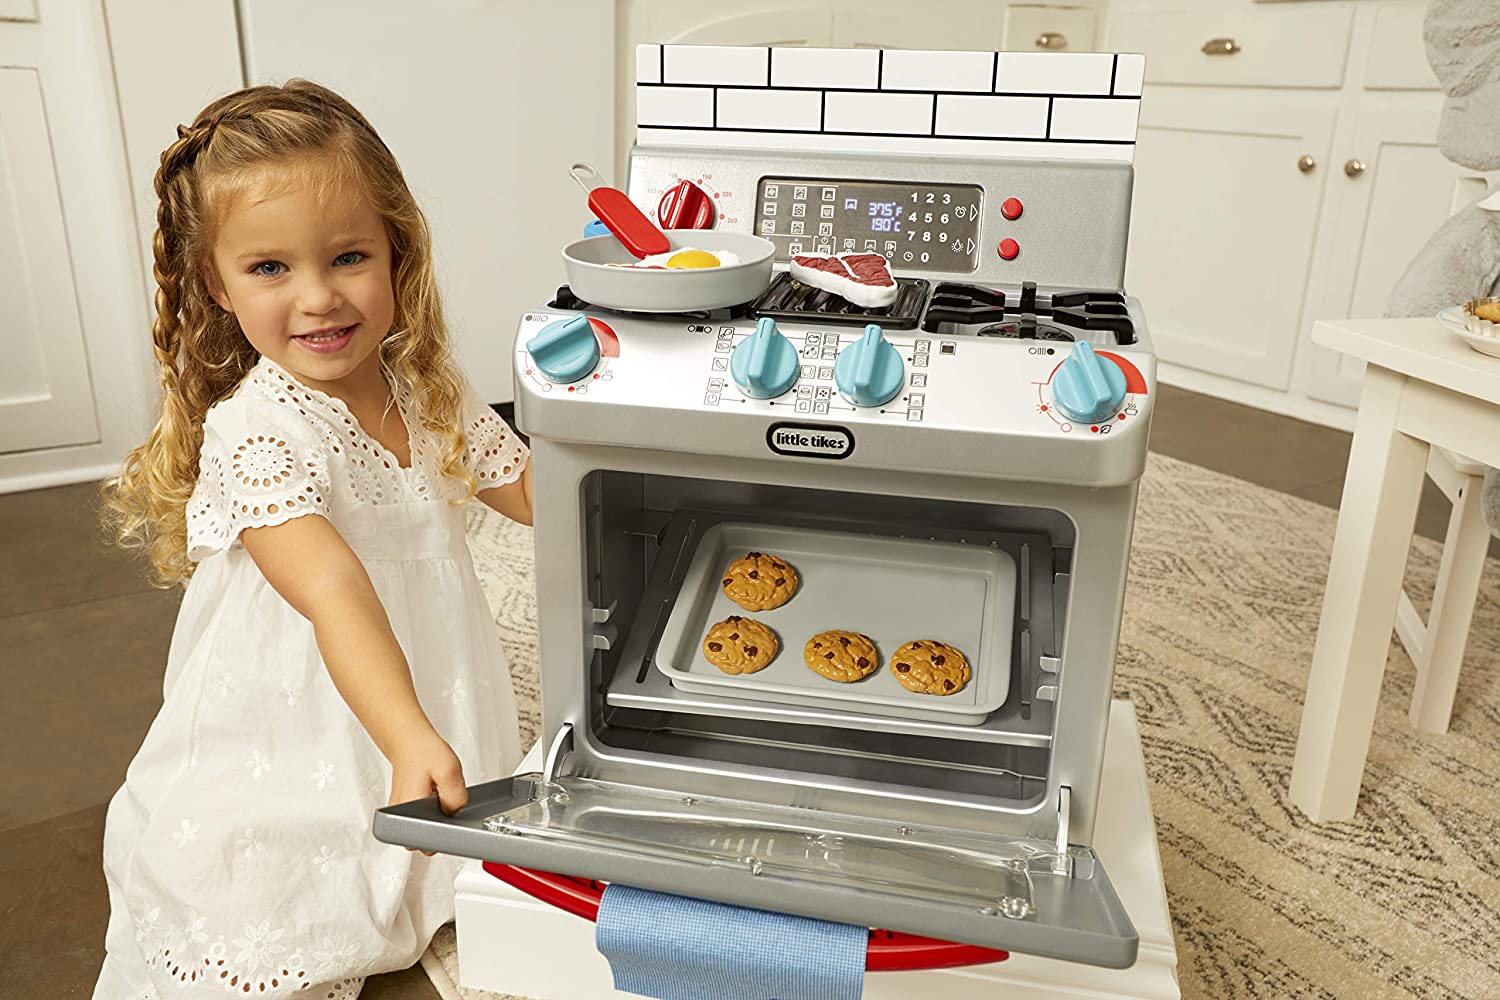 Pretend Play Kitchen Toys for Kids: Toy Oven w/ Light & Sound